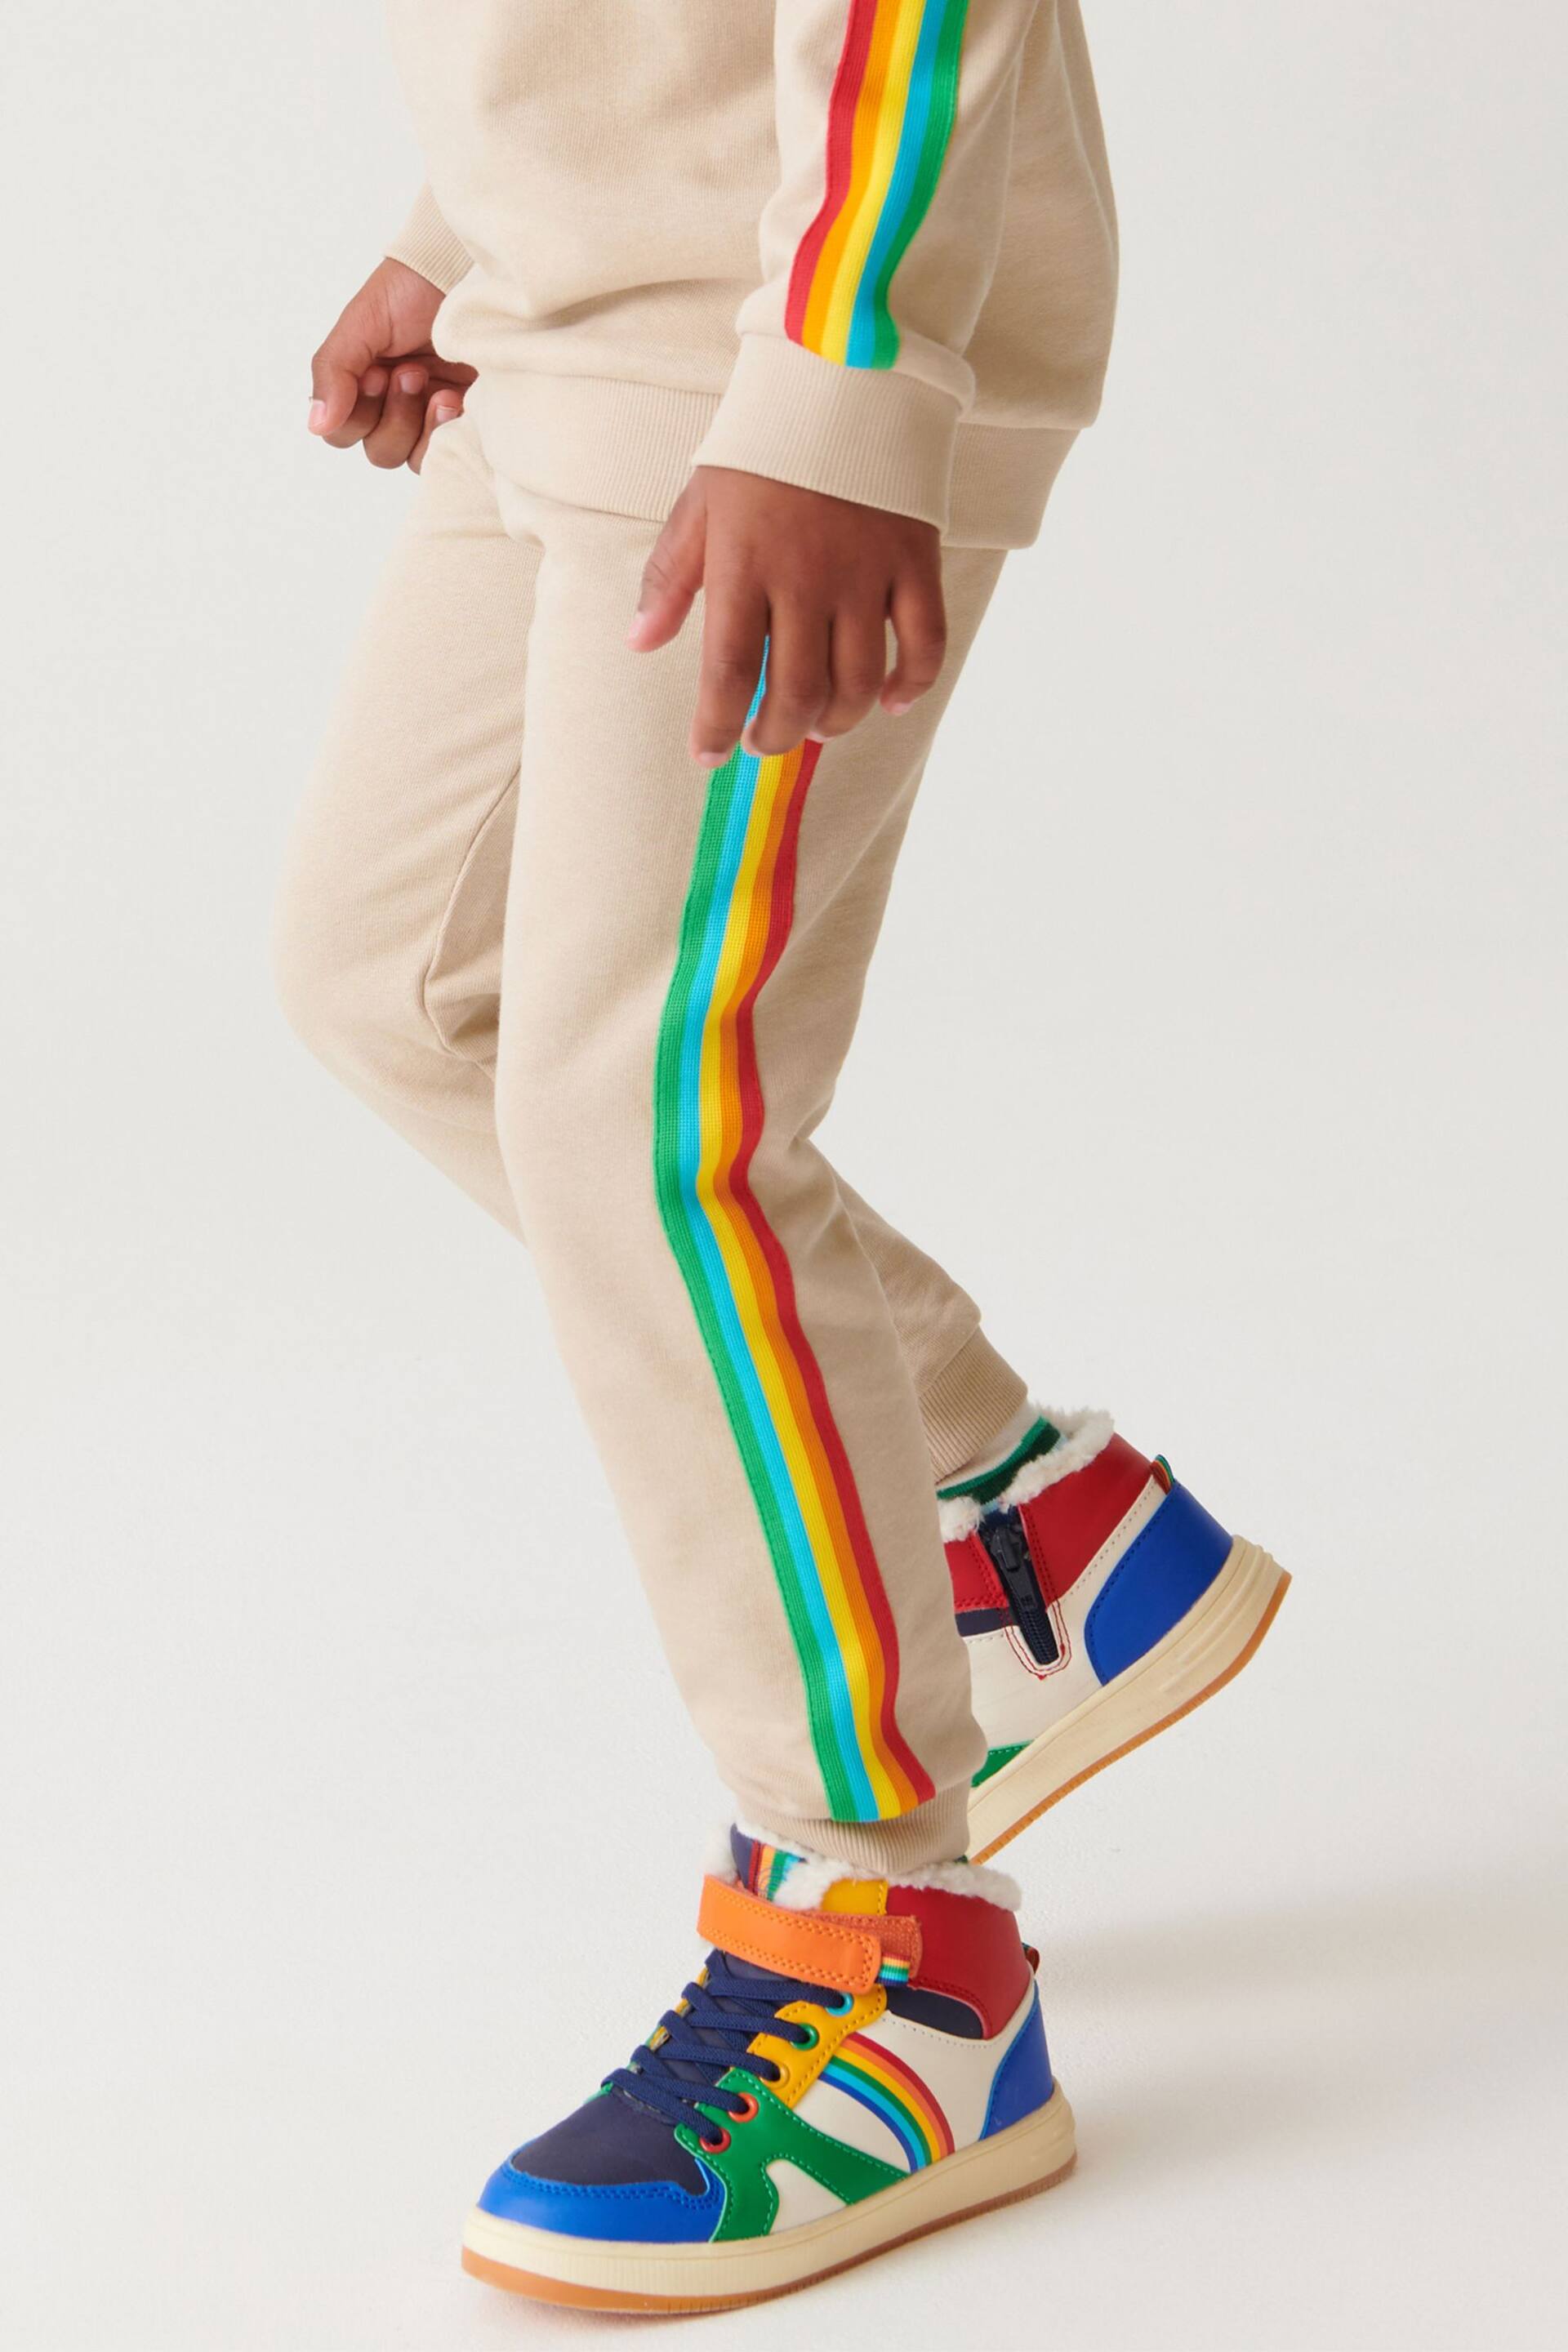 Little Bird by Jools Oliver Stone Rainbow Striped Joggers - Image 1 of 9